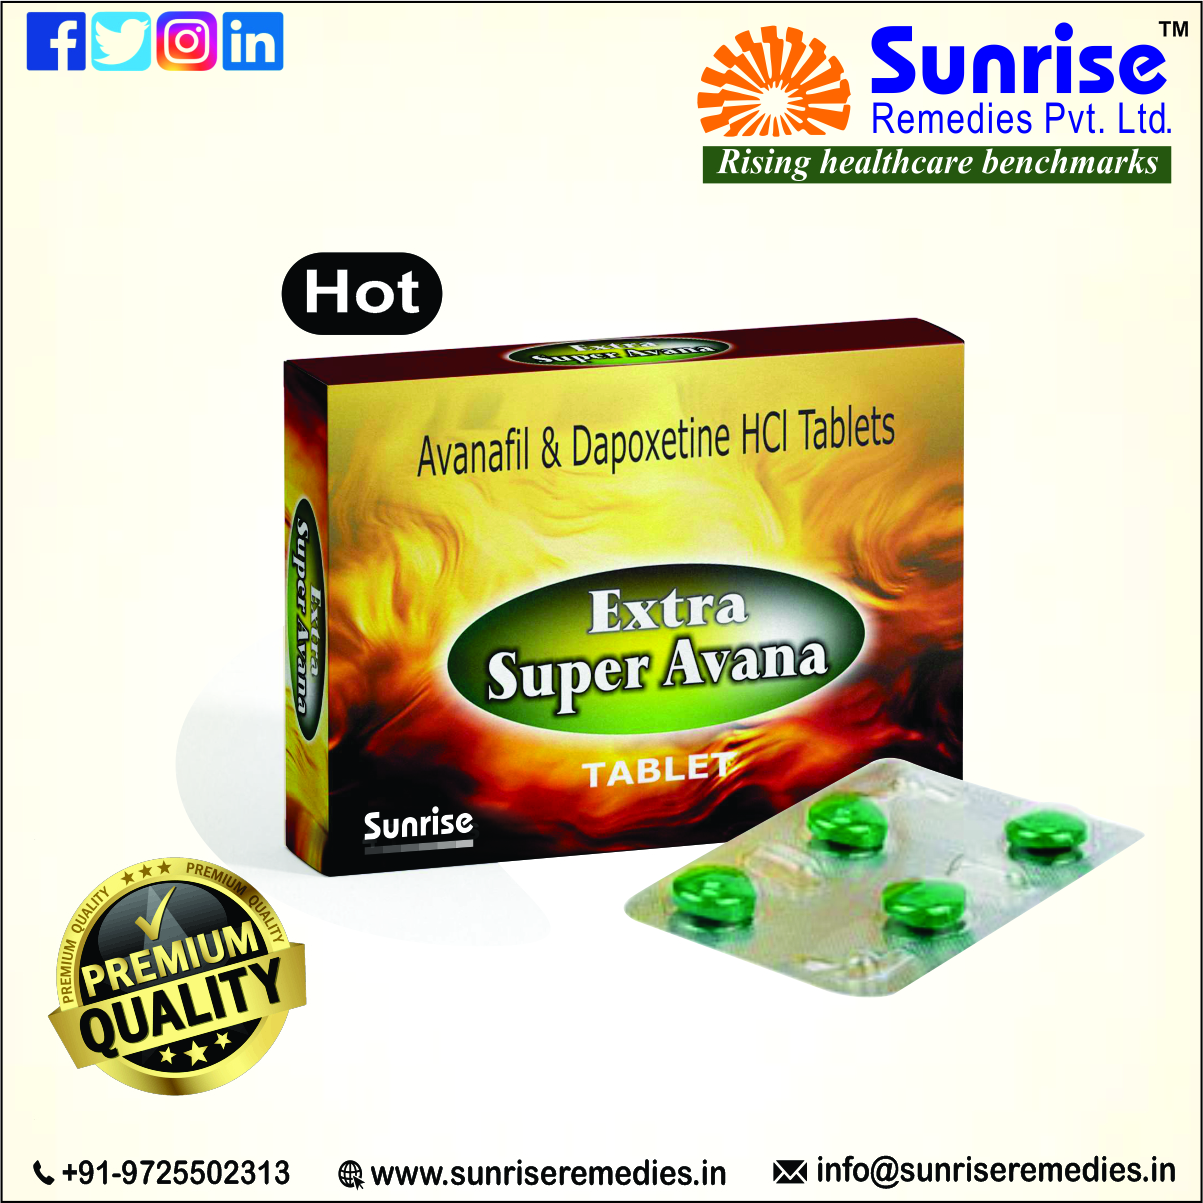 Extra Super Avana | ED and PE Products - Sunrise RemediesHealth and BeautyHealth Care ProductsAll Indiaother